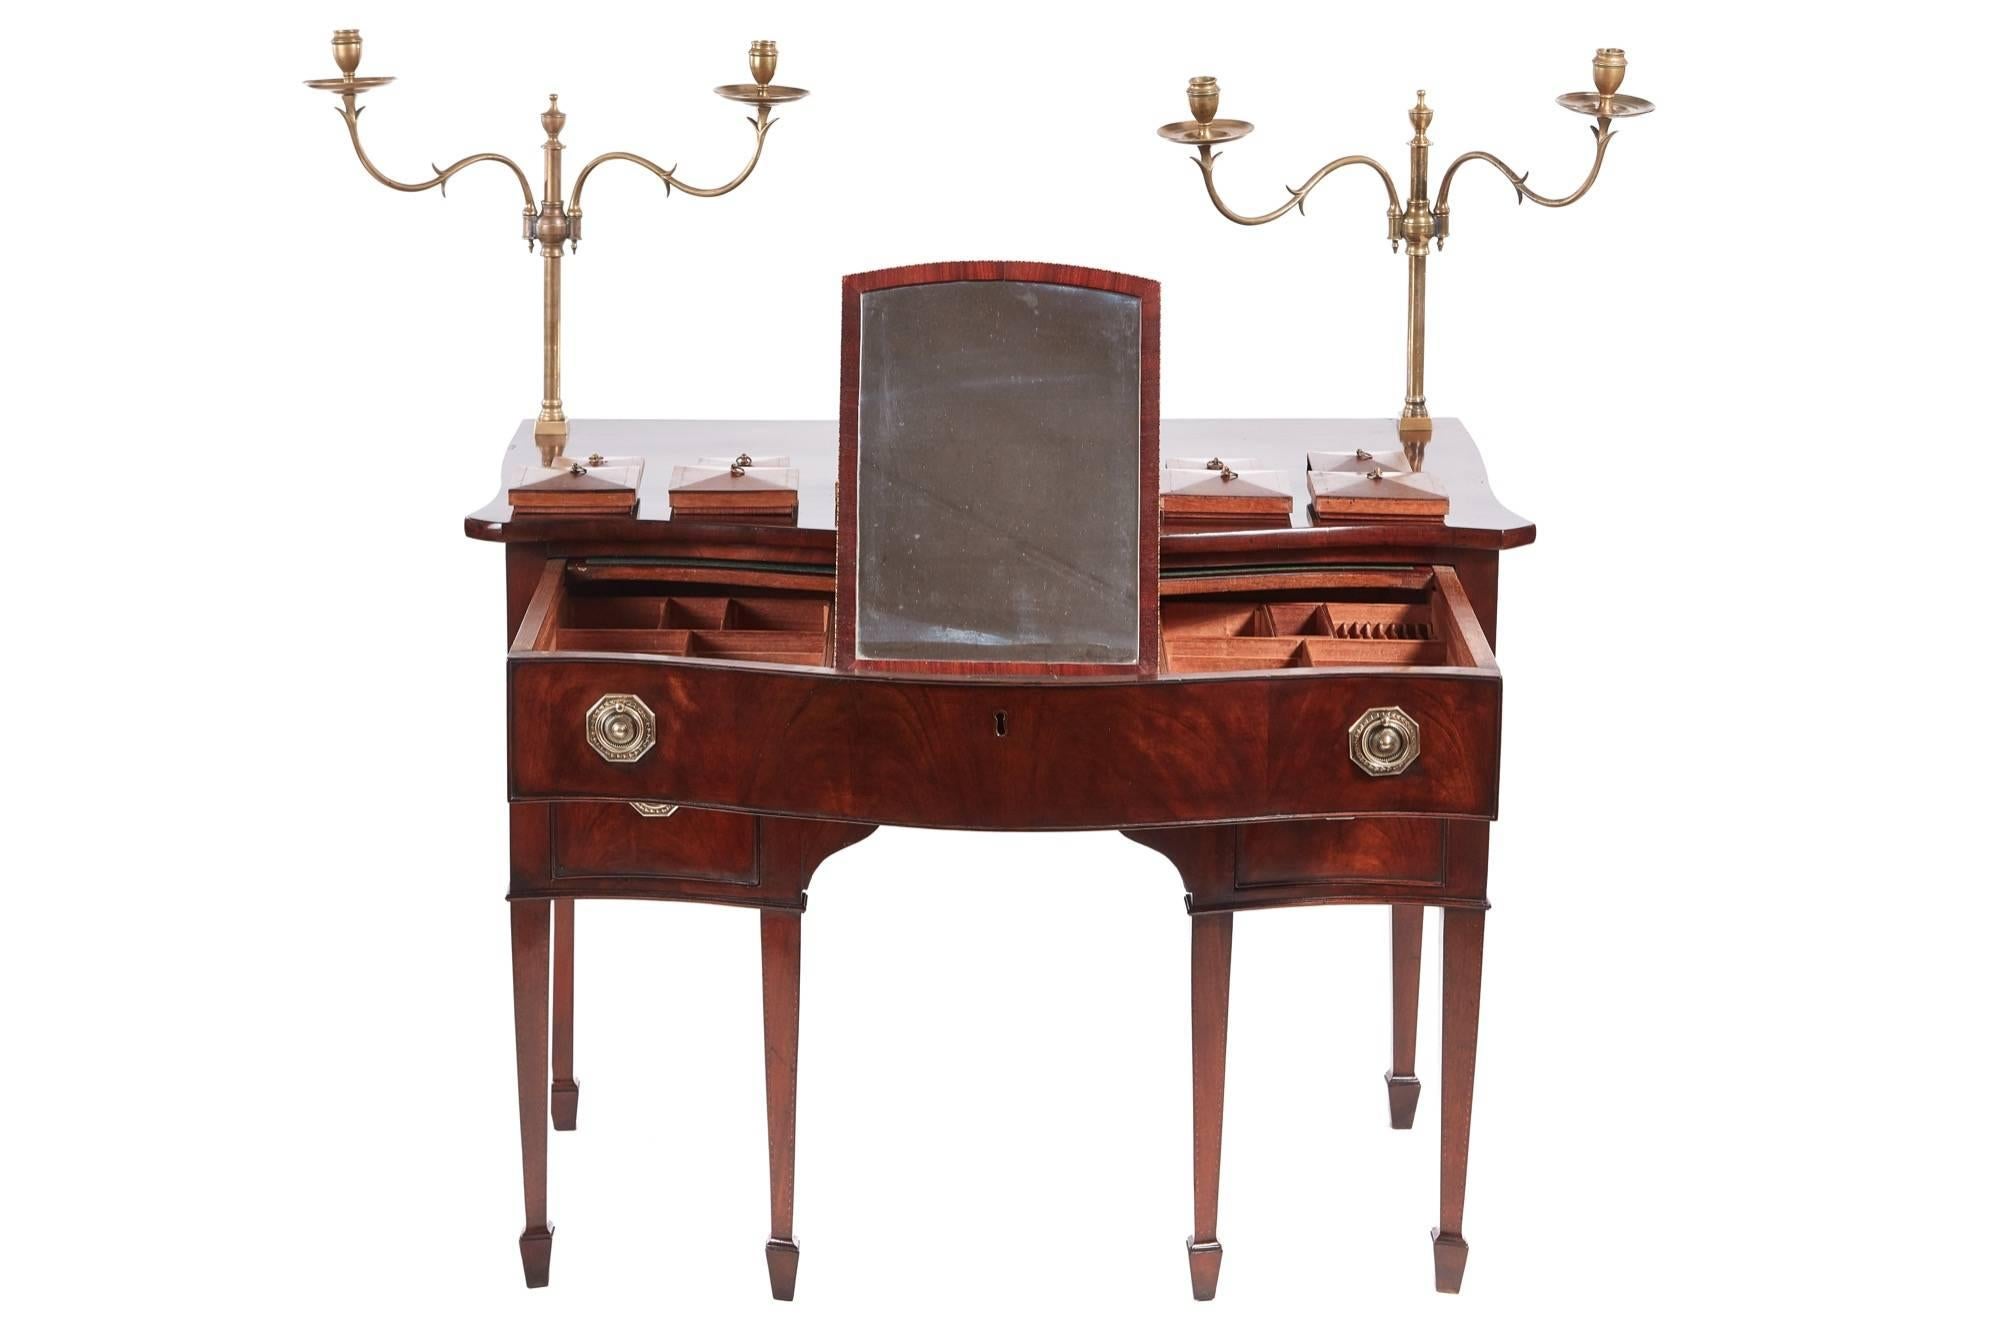 Unusual George III mahogany serpentine fronted dressing table, with a pair of brass candelabrum, lovely mahogany top, one long serpentine drawer fitted with boxes, brushing slide and a folding mirror, two small drawers all with original brass